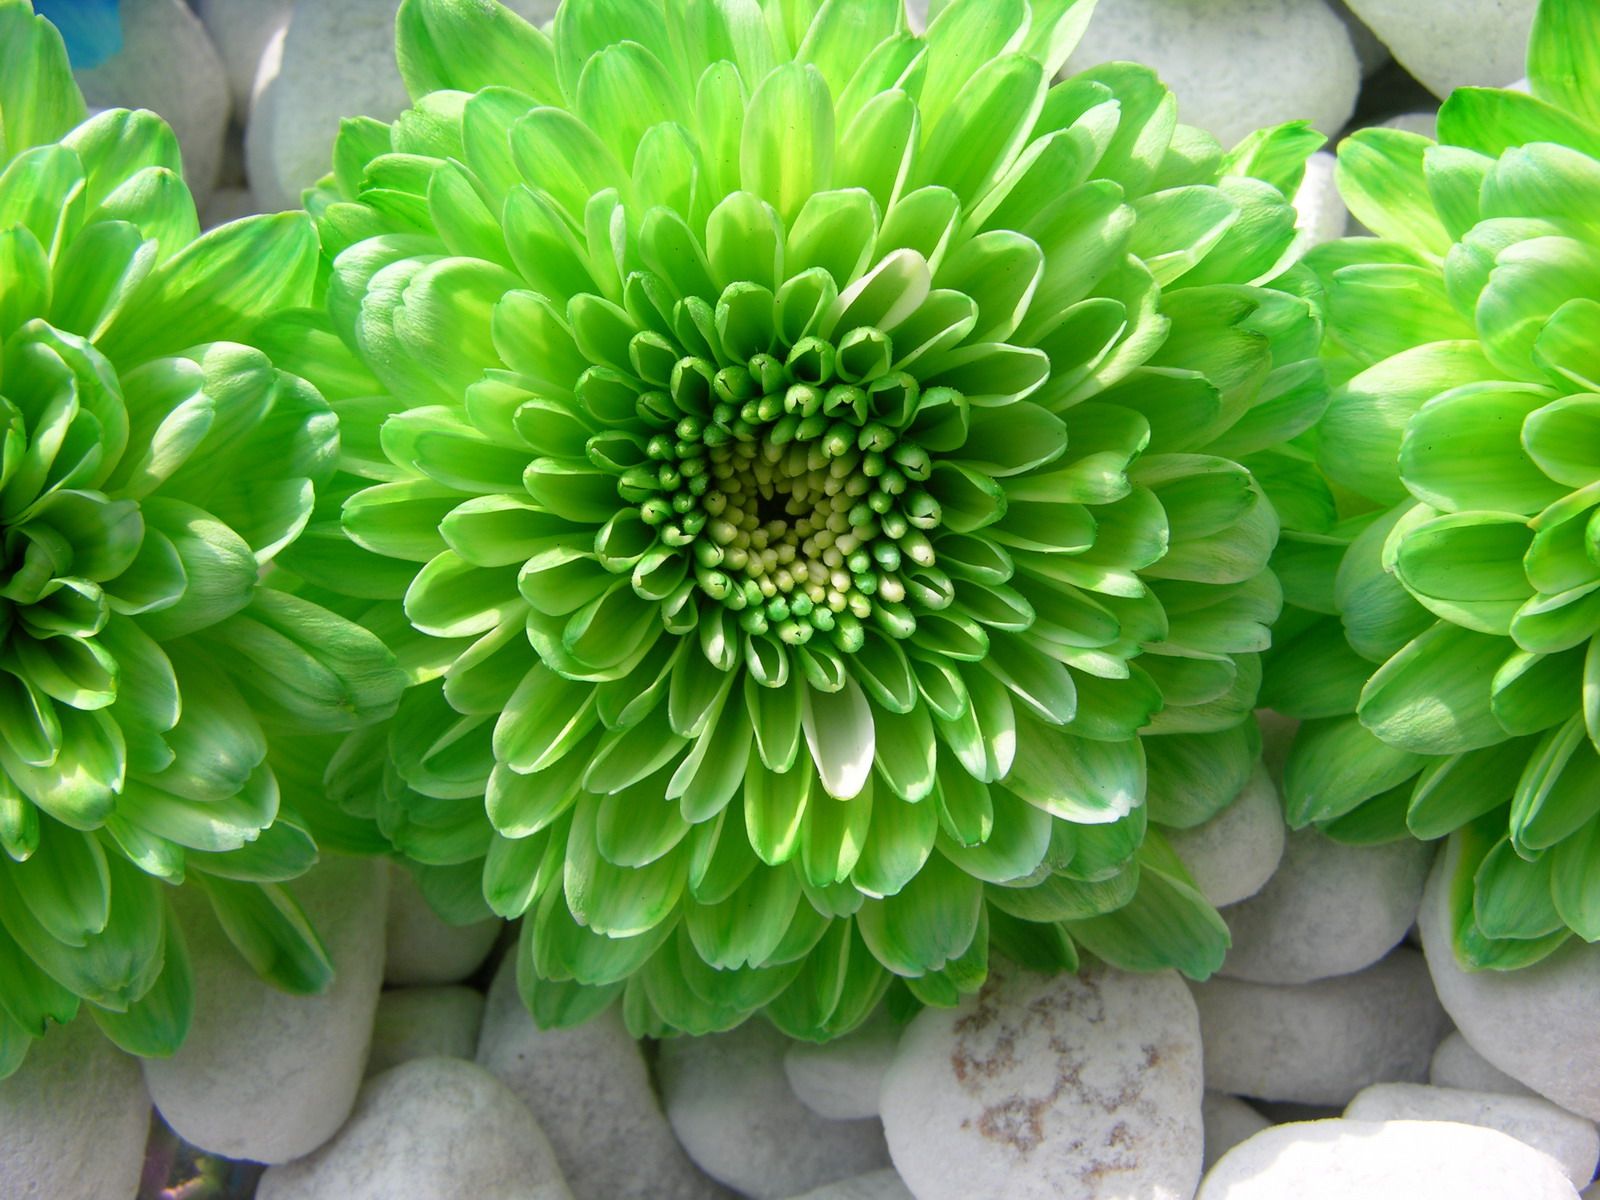 Picture Of Green Flowers | Stock Flower Images | Pinterest | Green ...